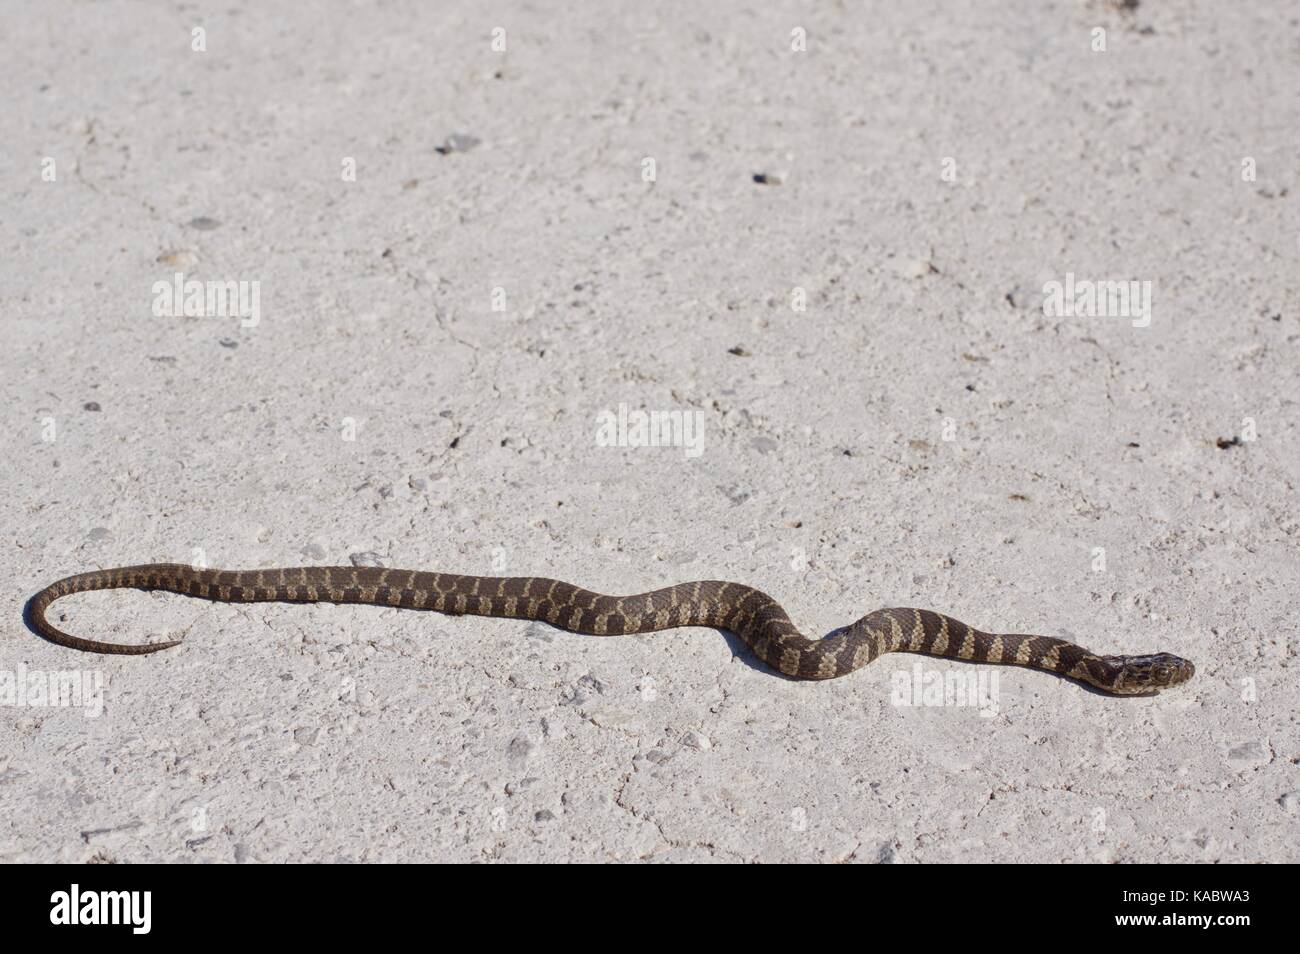 A young Common Watersnake (Nerodia sipedon sipedon) stretched out on a gravel road at Squaw Creek National Wildlife Refuge, Missouri, USA Stock Photo